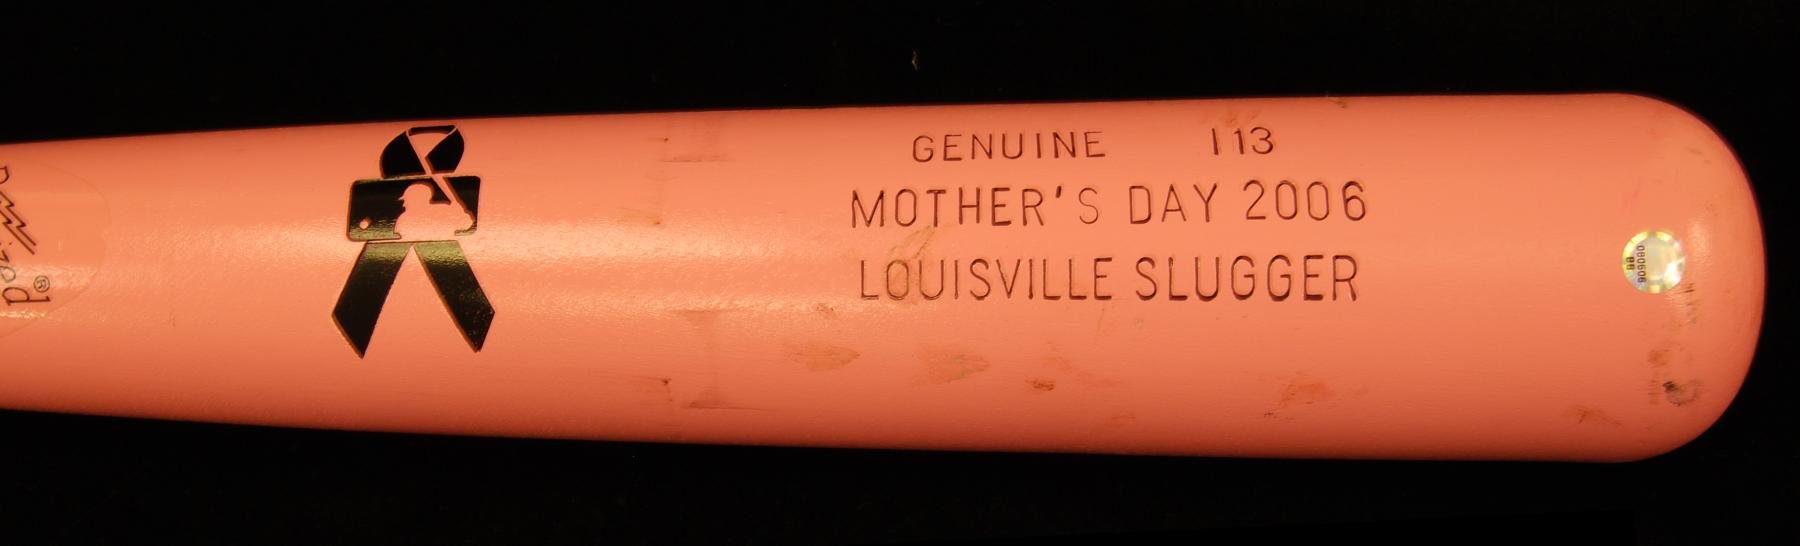 Pablo Sandoval's pink bat leads Giants to Mother's Day win